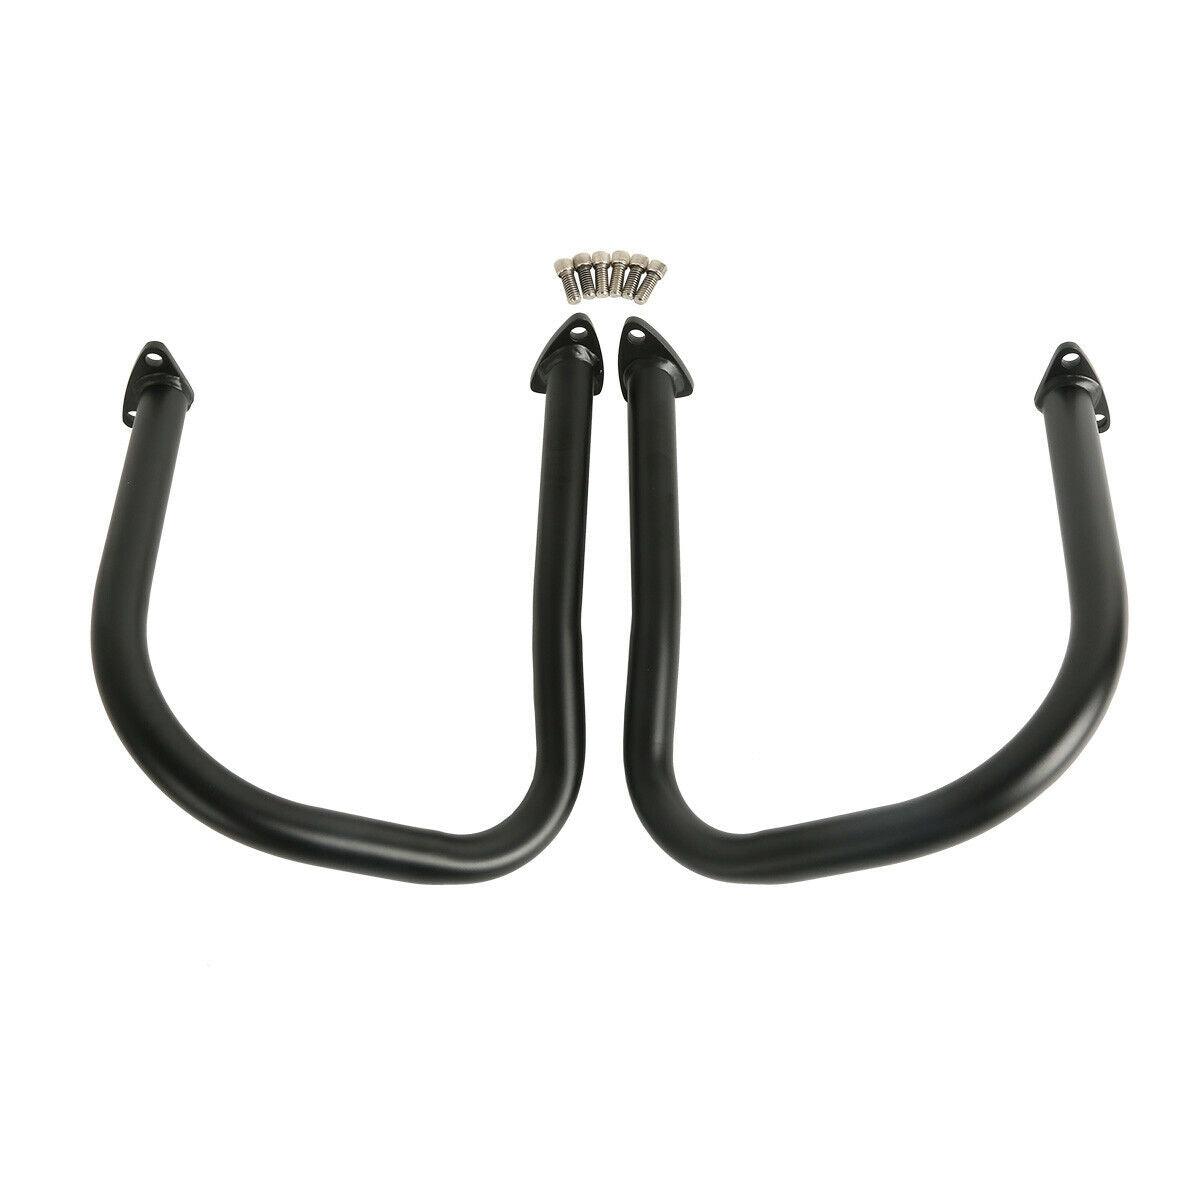 Rear Highway Guard Bars Fit For Indian Chieftain Dark horse 16-20 - Moto Life Products